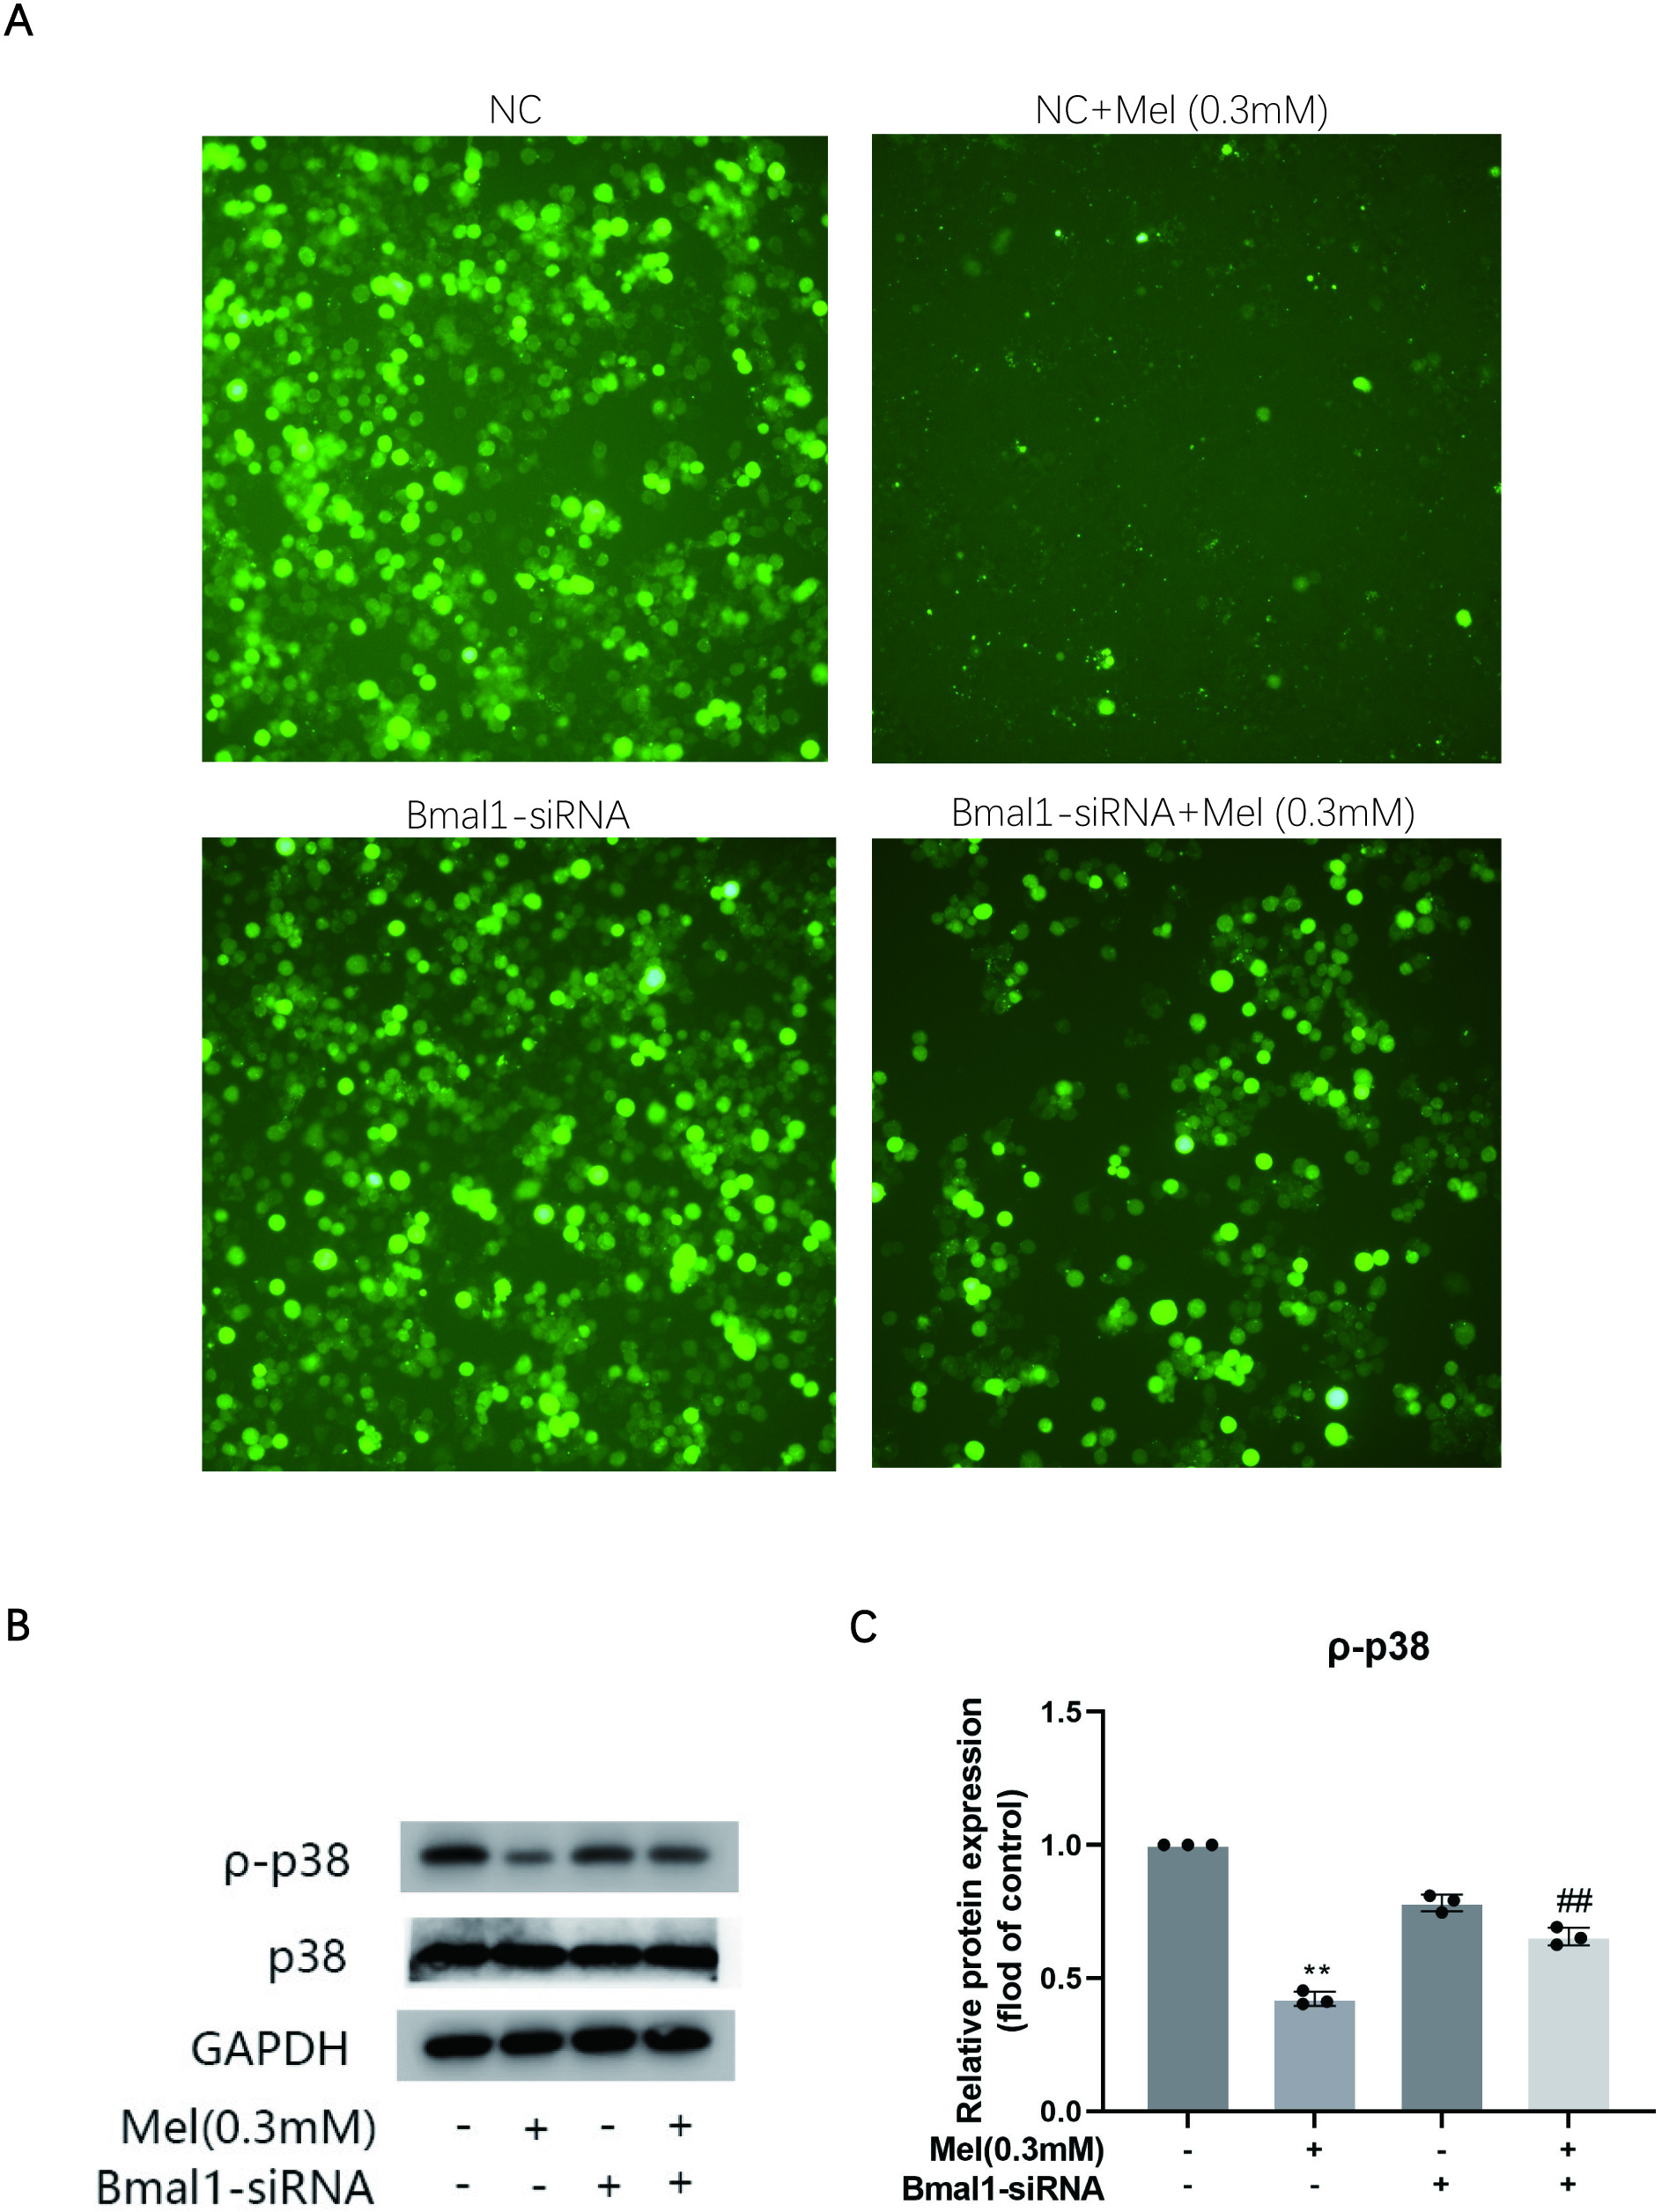 Fig. 3 
            Melatonin increased the expression of BMAL1 to inhibit the activation of reactive oxygen species (ROS) and phosphorylation of mitogen-activated protein kinase (MAPK)-p38. a) ROS were detected by a fluorescent probe after treatment with 0.3 mM melatonin or BMAL1-small interfering RNA (siRNA). b) Protein expression of phosphorylated p38, p38, and glyceraldehyde 3-phosphate dehydrogenase (GAPDH) indicated the effect of treatment with melatonin (0.3 mM) and BMAL1-siRNA. c) Relative protein expression levels of the proteins in b). Experiments were implemented in triplicate. Data are means and standard deviations, *p < 0.05, **p < 0.01 compared with control cells and #p < 0.05, ##p < 0.01 compared with melatonin (0.3 mM) applied alone analyzed by using one-way analysis of variance. Mel, melatonin.
          